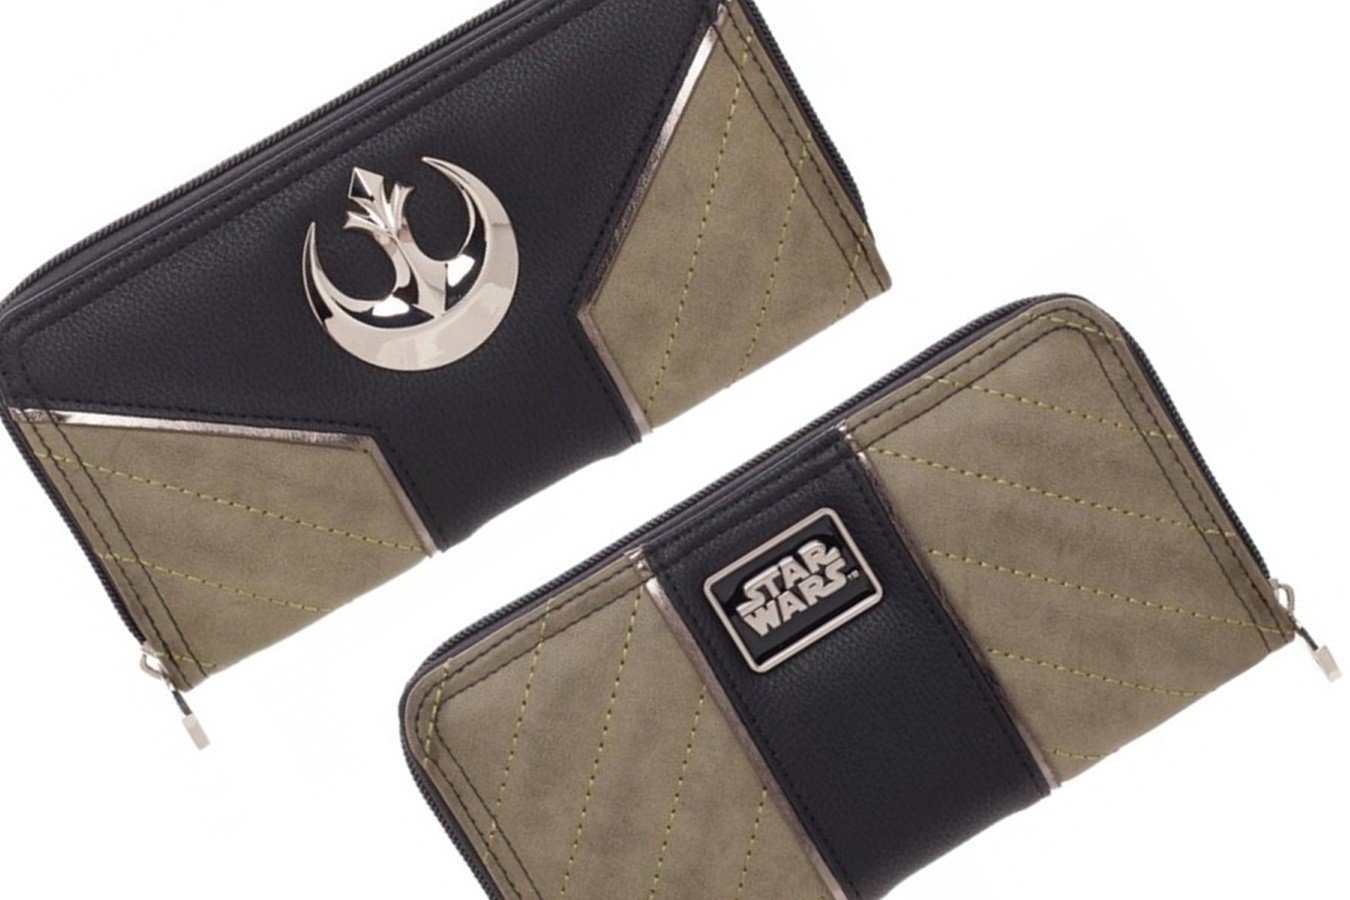 Bioworld Rogue One Jyn Erso wallet available